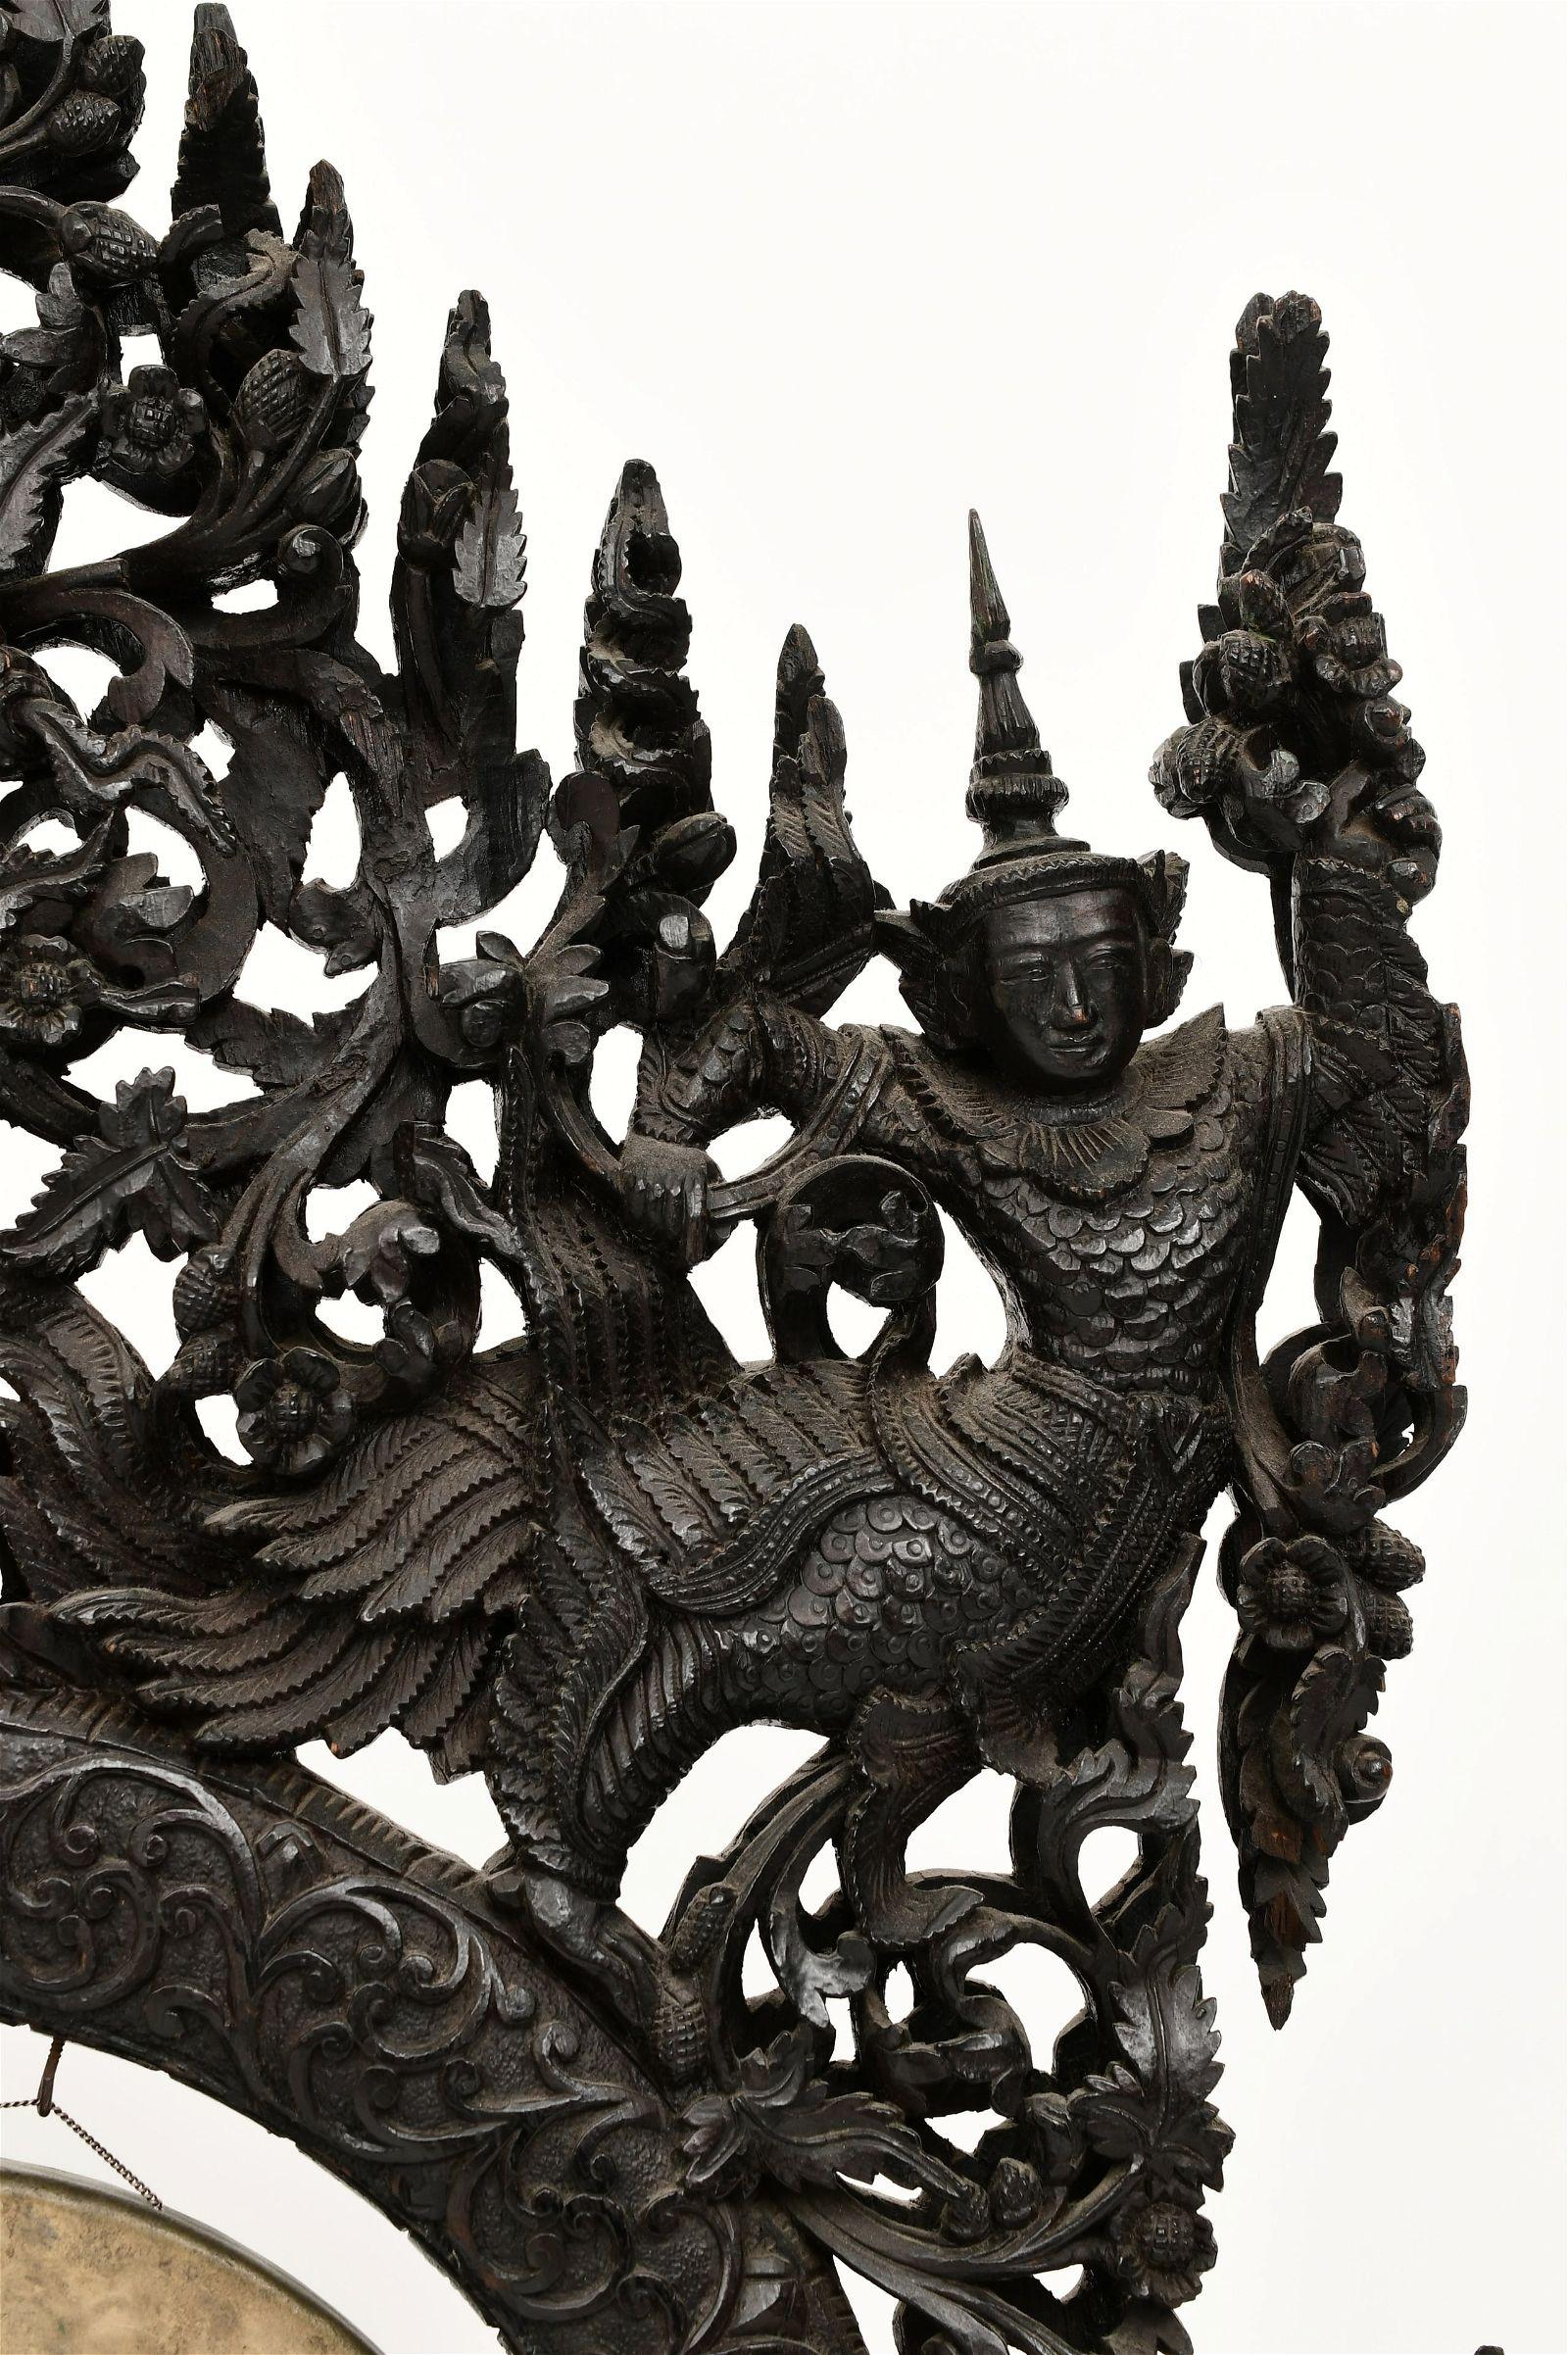 19th century ceremonial gong with exquisite carvings of dragons, mythological figures, foliate and floral motifs and seated figure at center.